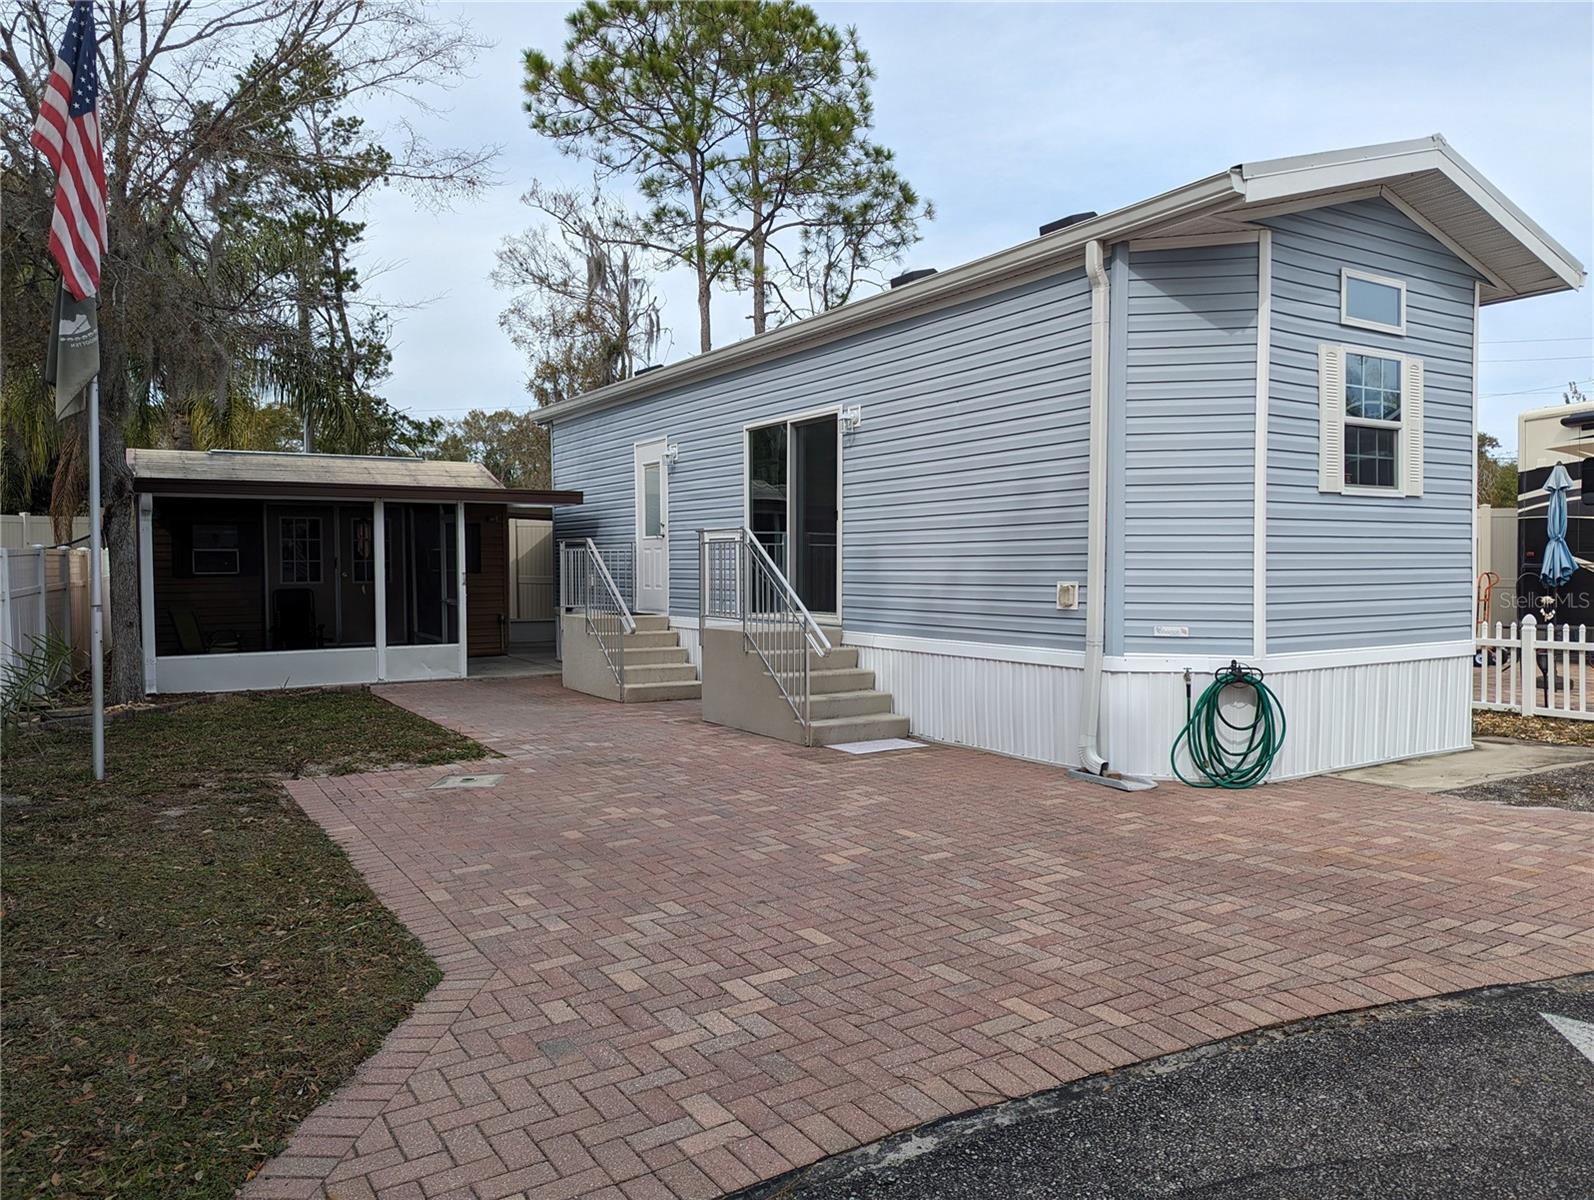 20300 LEONARD 2, LUTZ, Manufactured Home - Post 1977,  for sale, The Mount Dora Group 